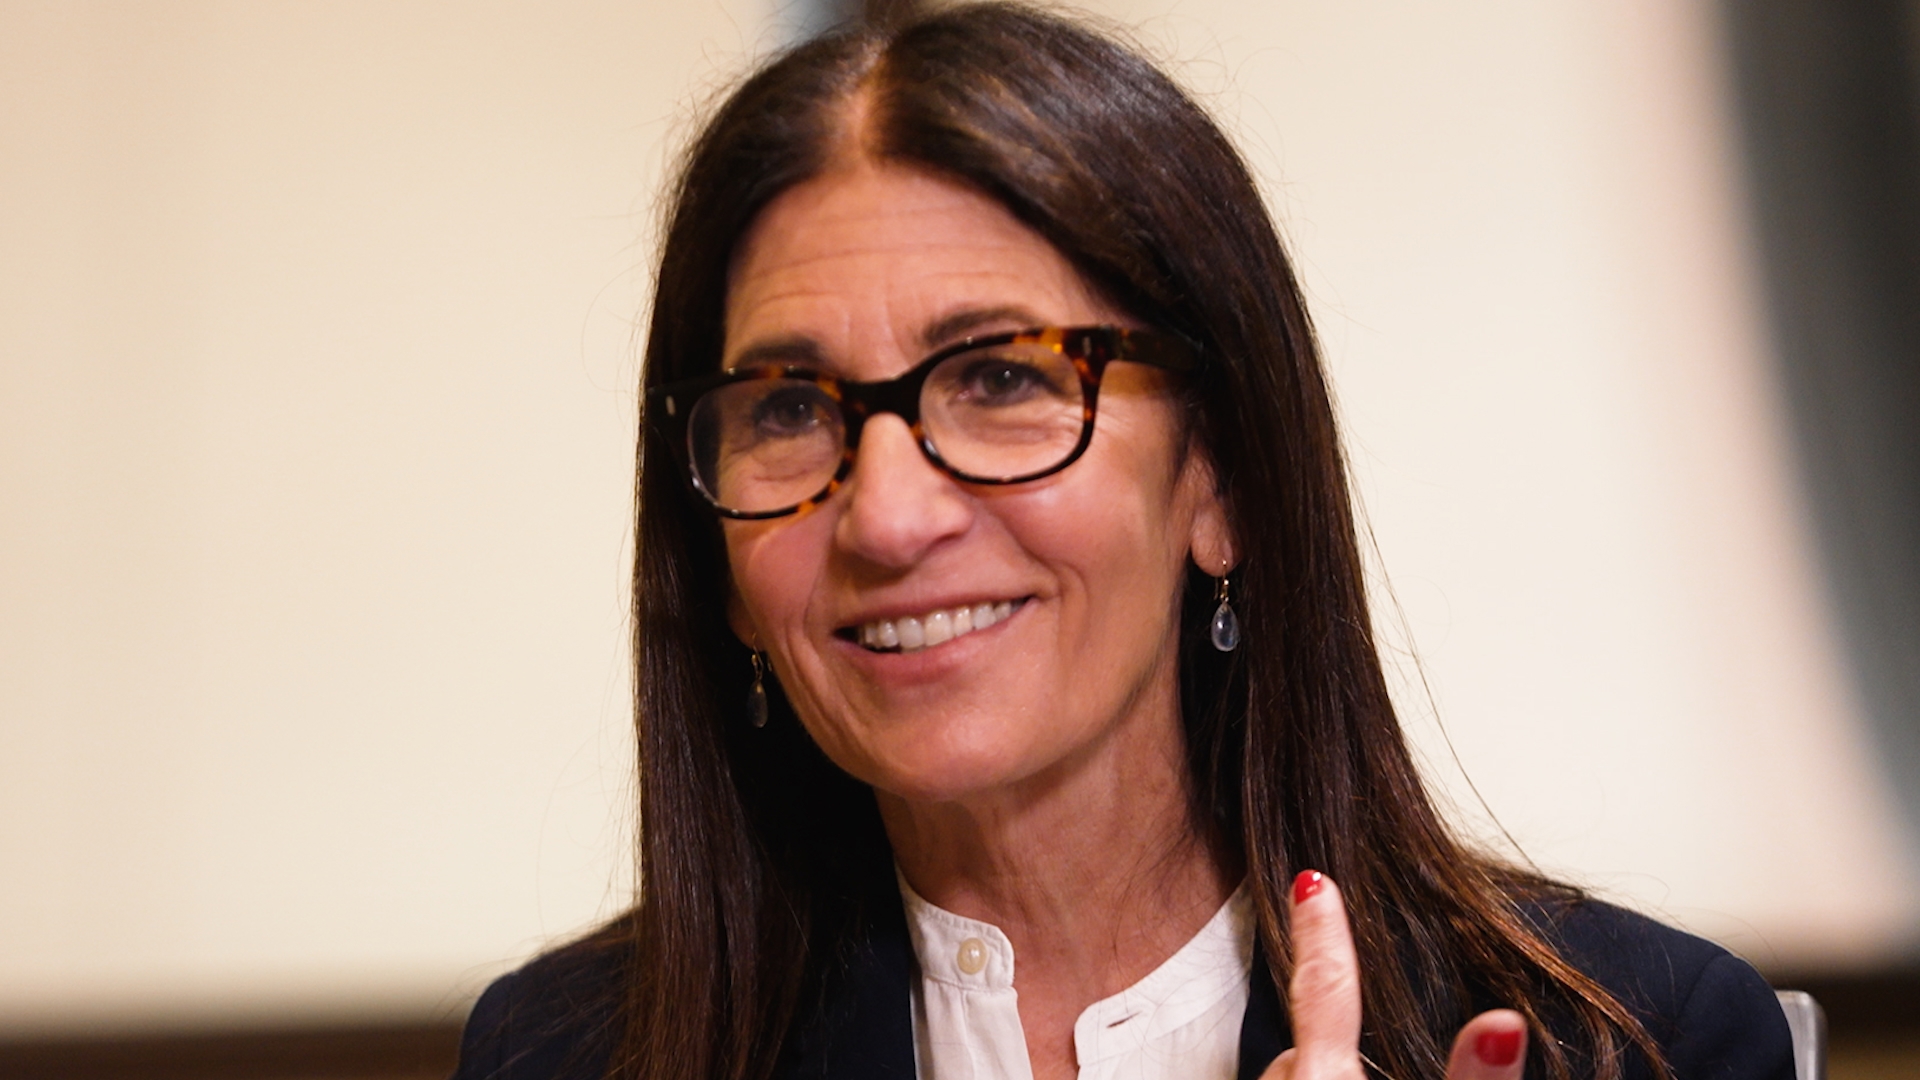 "It's my mission to help people feel comfortable and confident in their skin," Bobbi Brown said.